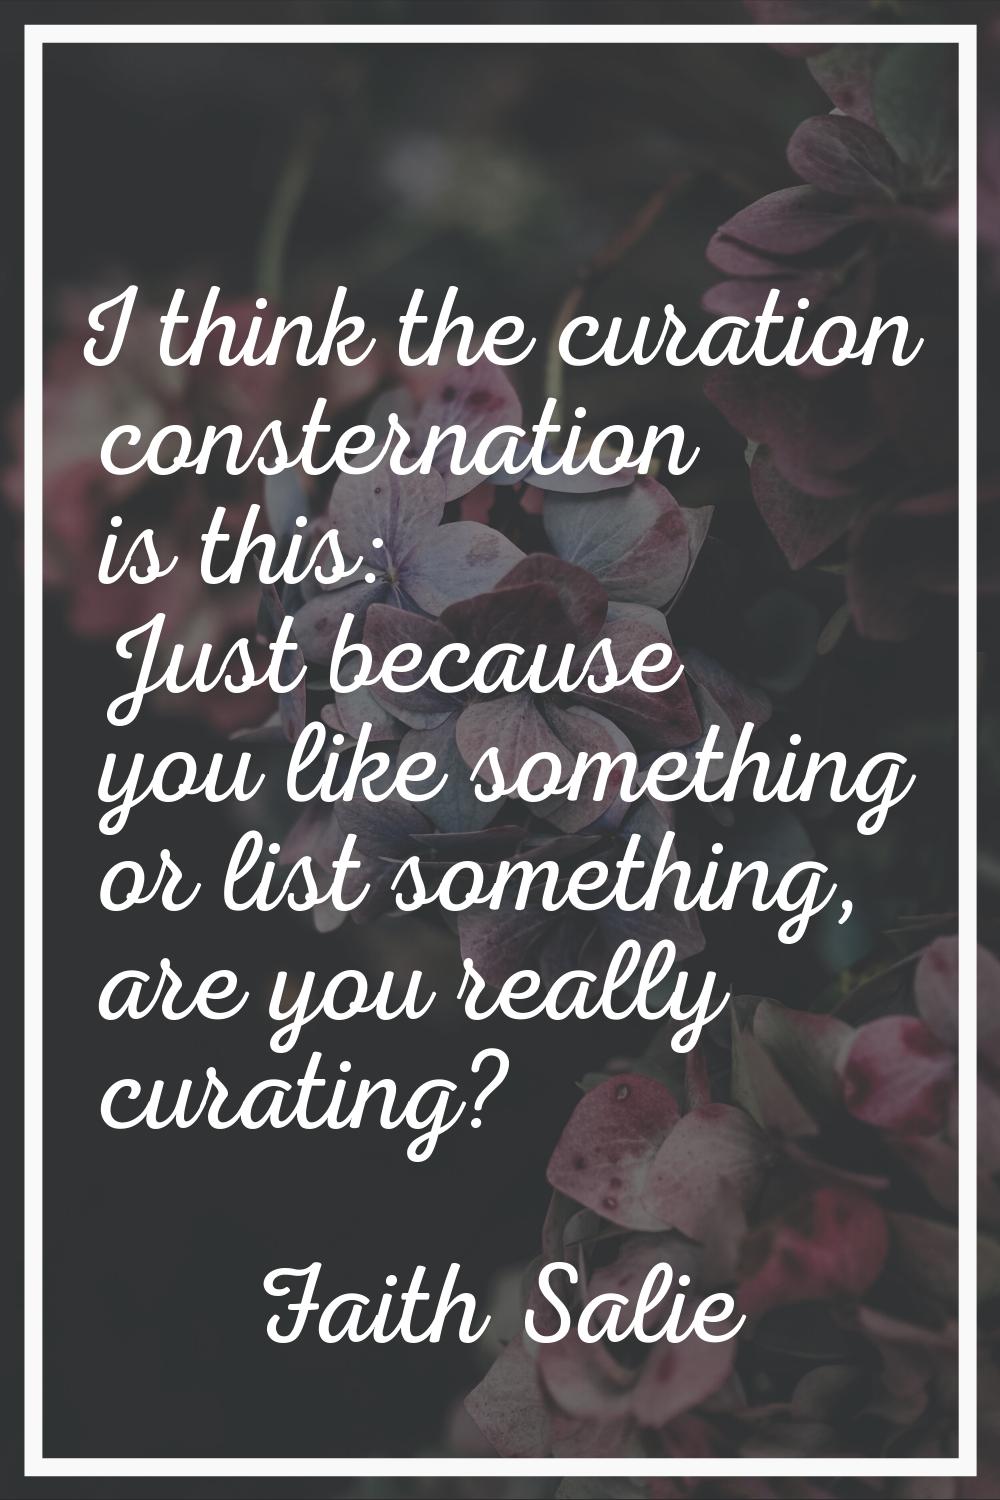 I think the curation consternation is this: Just because you like something or list something, are 